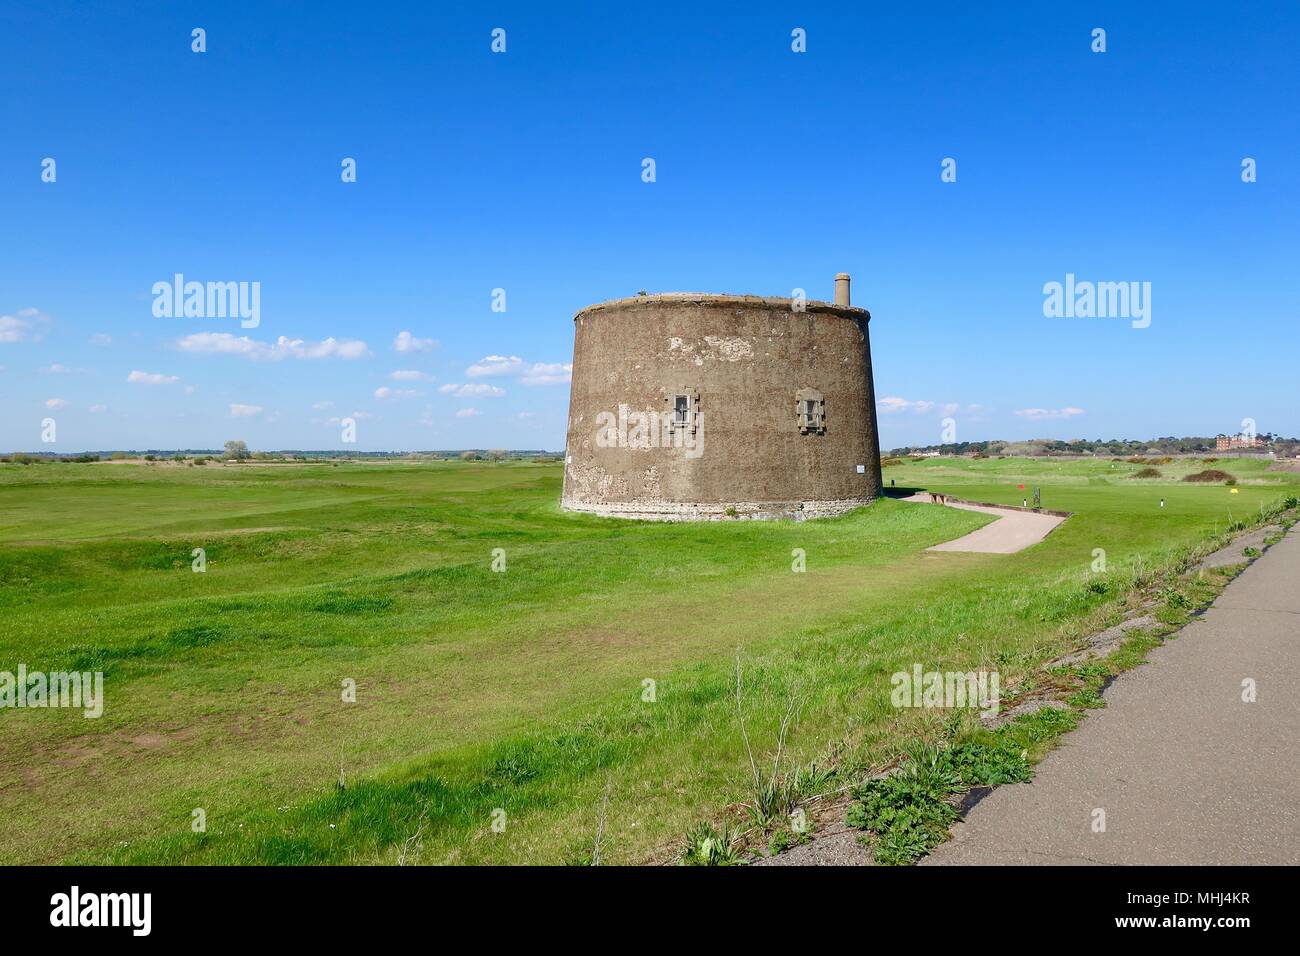 Martello tower on the golf course. Felixstowe Ferry golf club. Bright sunny spring afternoon. May 2018. Stock Photo